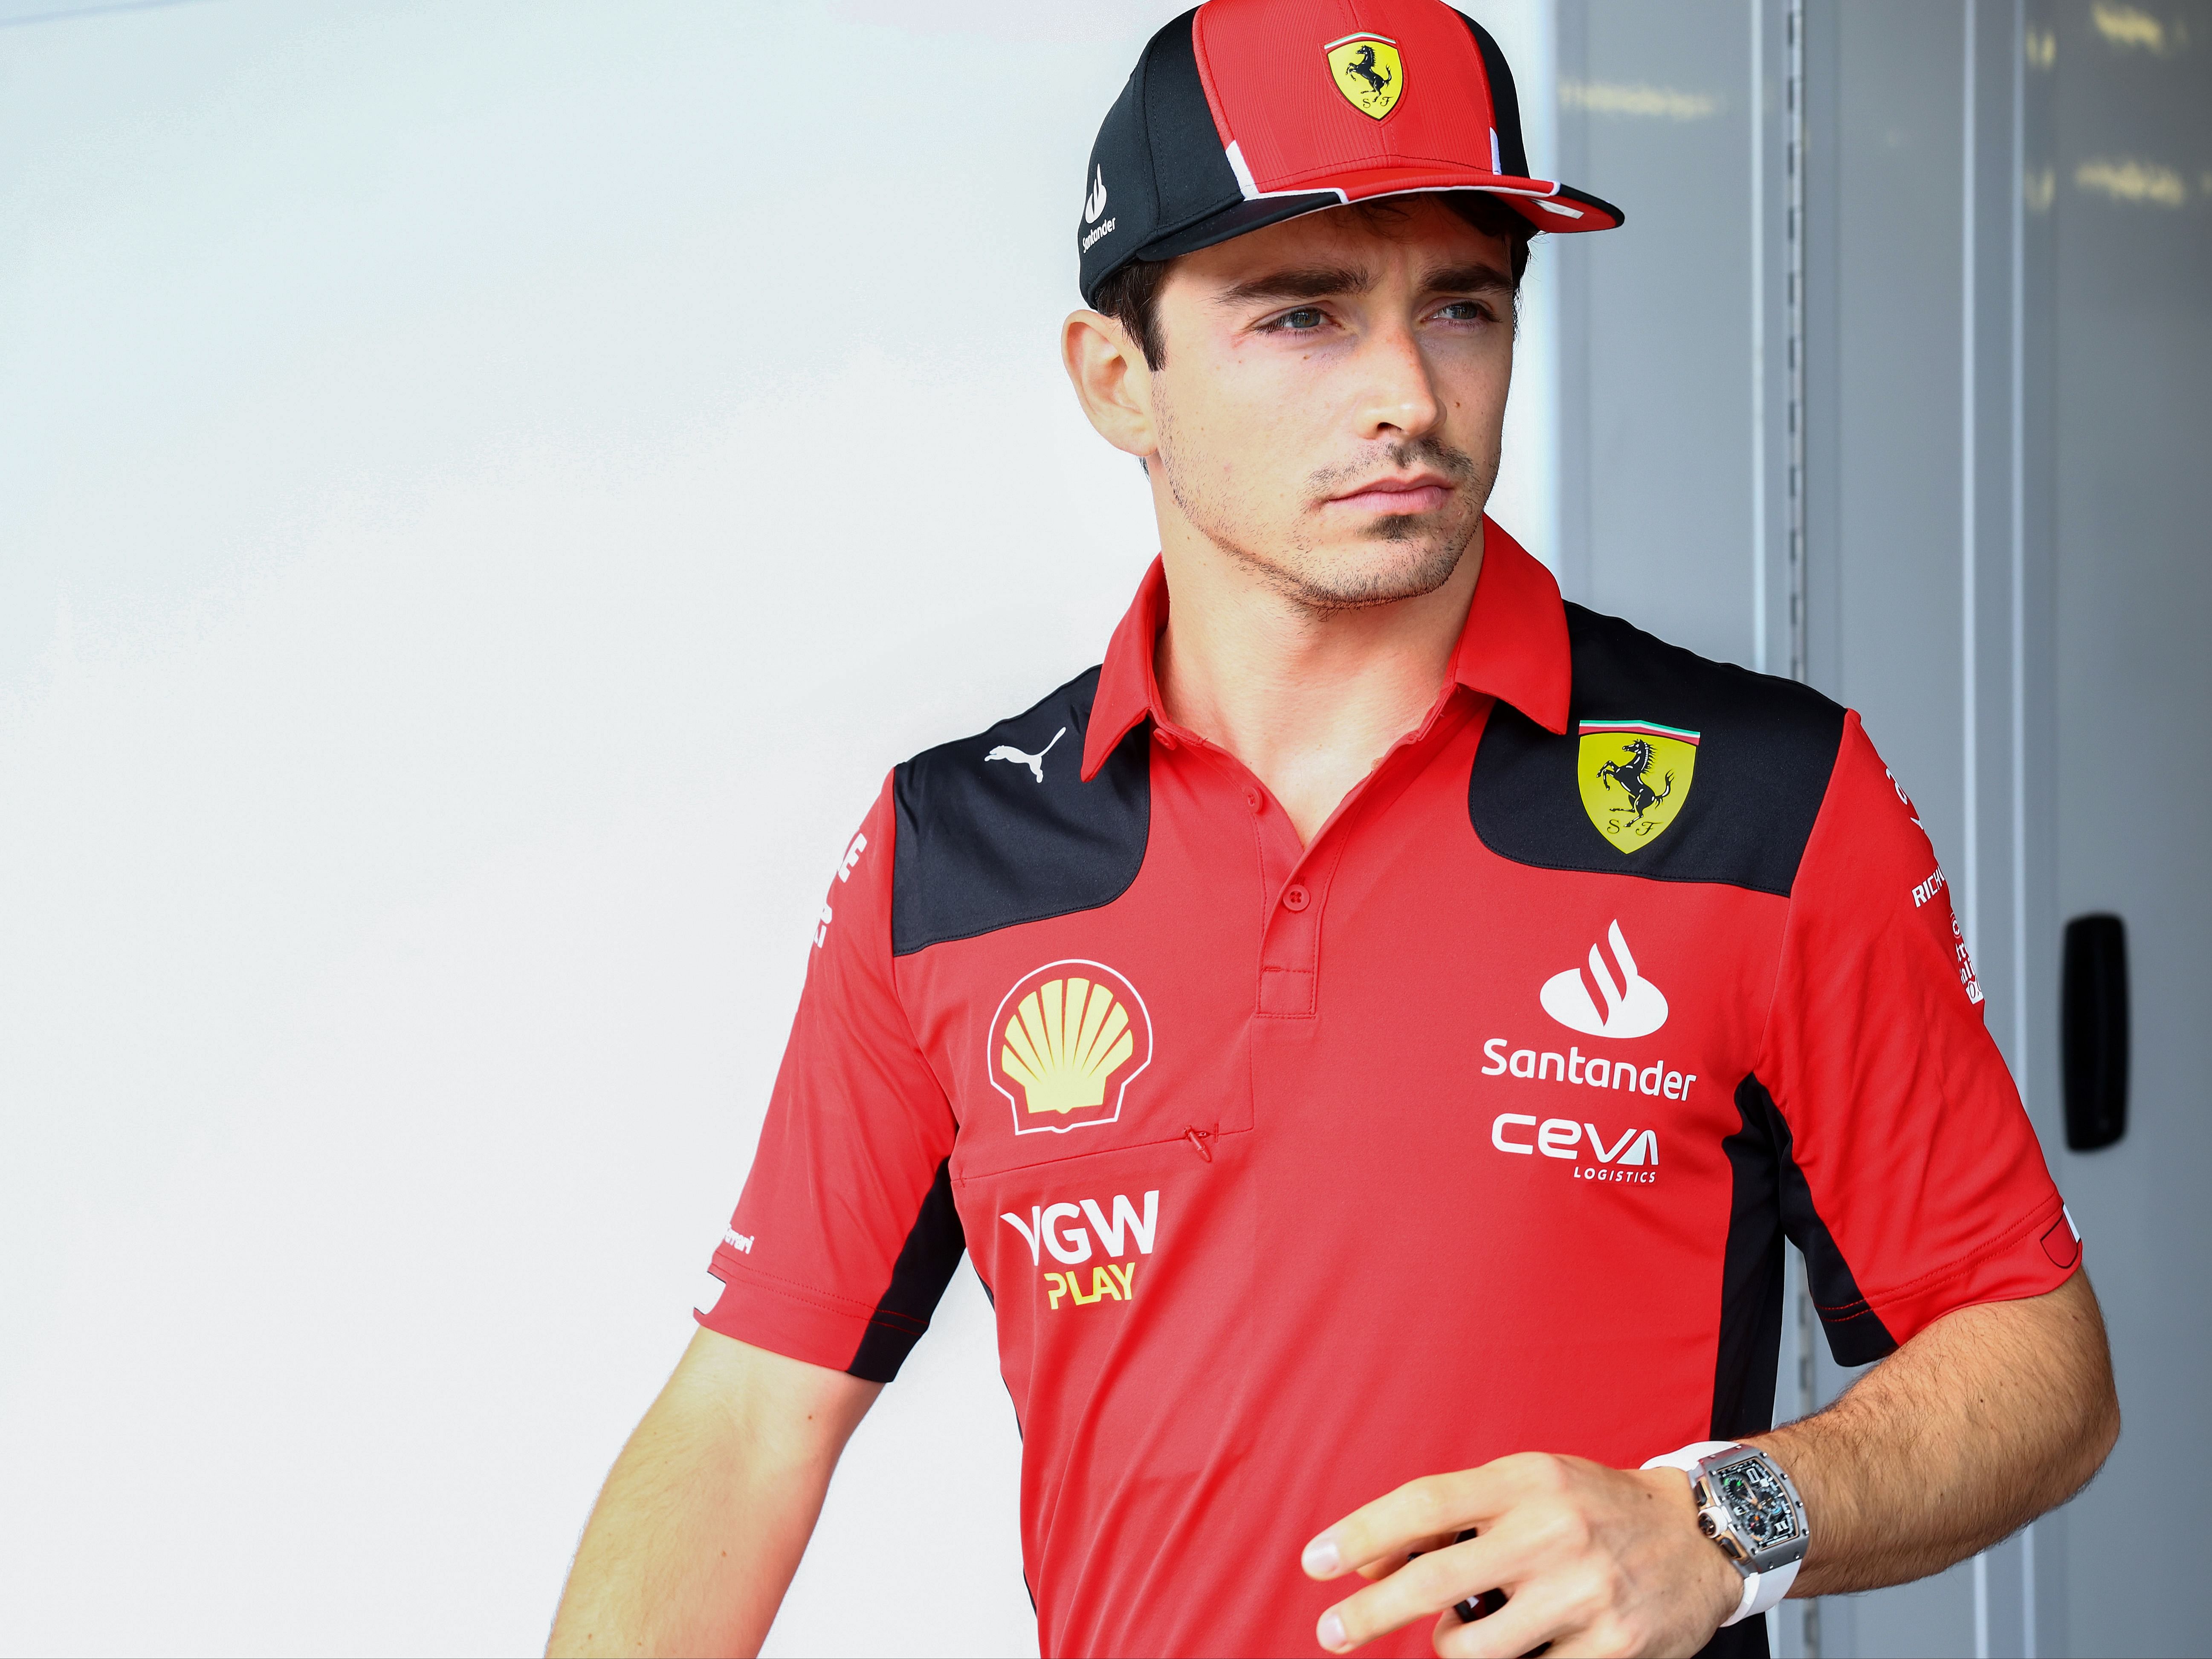 Charles Leclerc looks on in the paddock prior to the 2023 F1 Azerbaijan Grand Prix. (Photo by Mark Thompson/Getty Images)